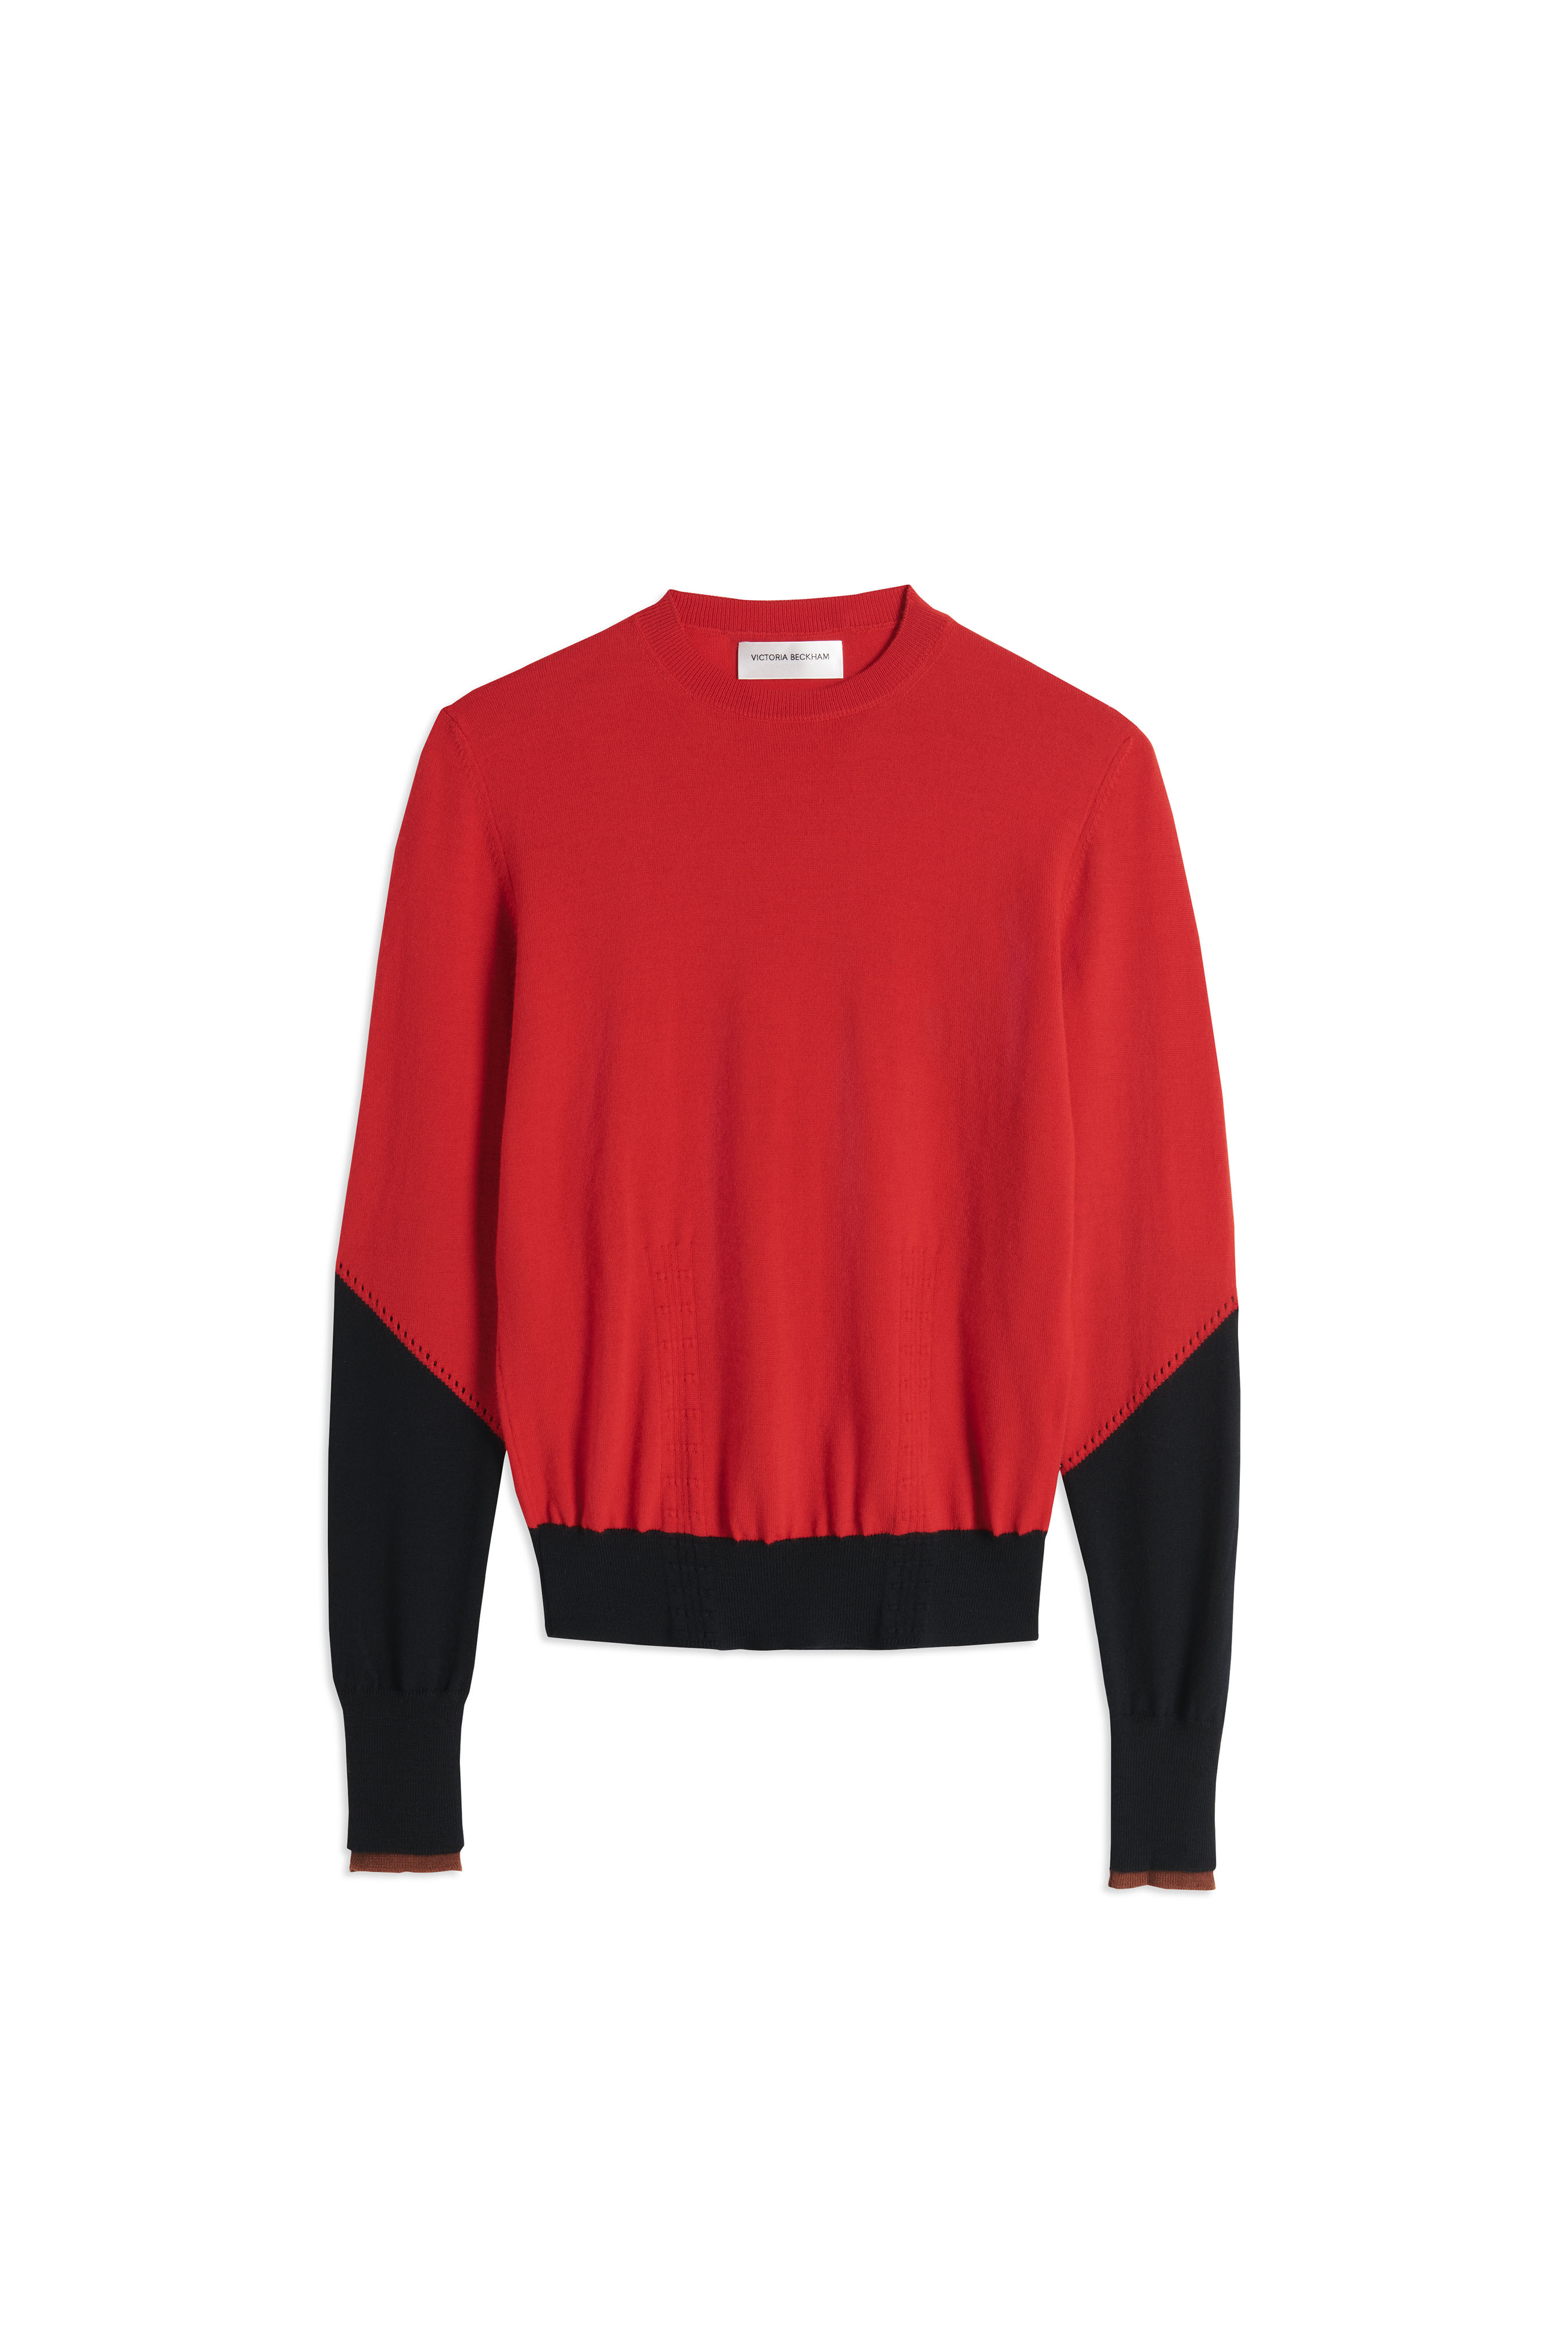 Victoria Beckham Partners With Woolmark For Luxurious Knitwear